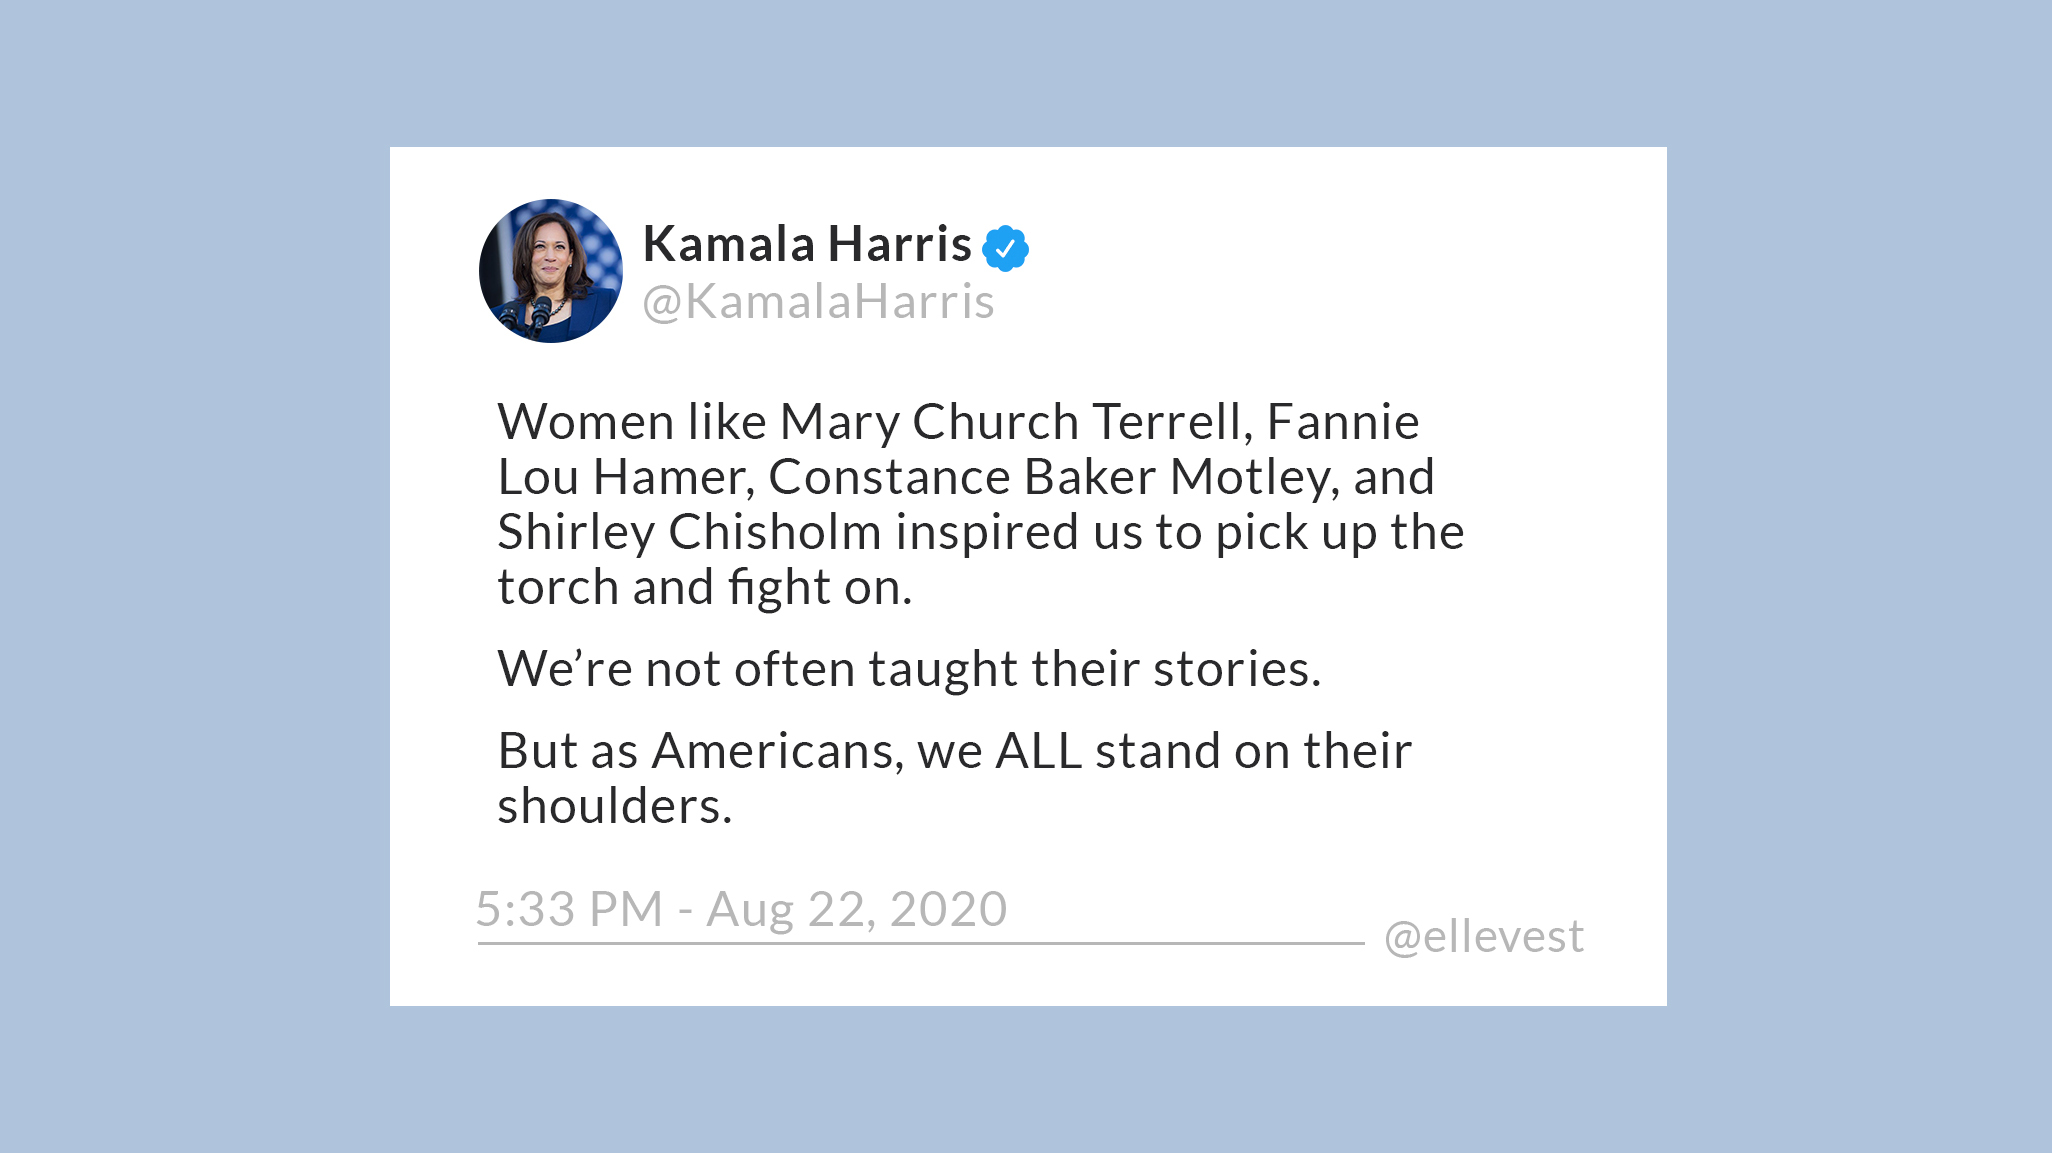 A tweet from 2020 by Kamala Harris saying that as Americans, we stand on the shoulders of women like Mary Church Terrell, Fannie Lou Hamer, and others whose stories are not often told.